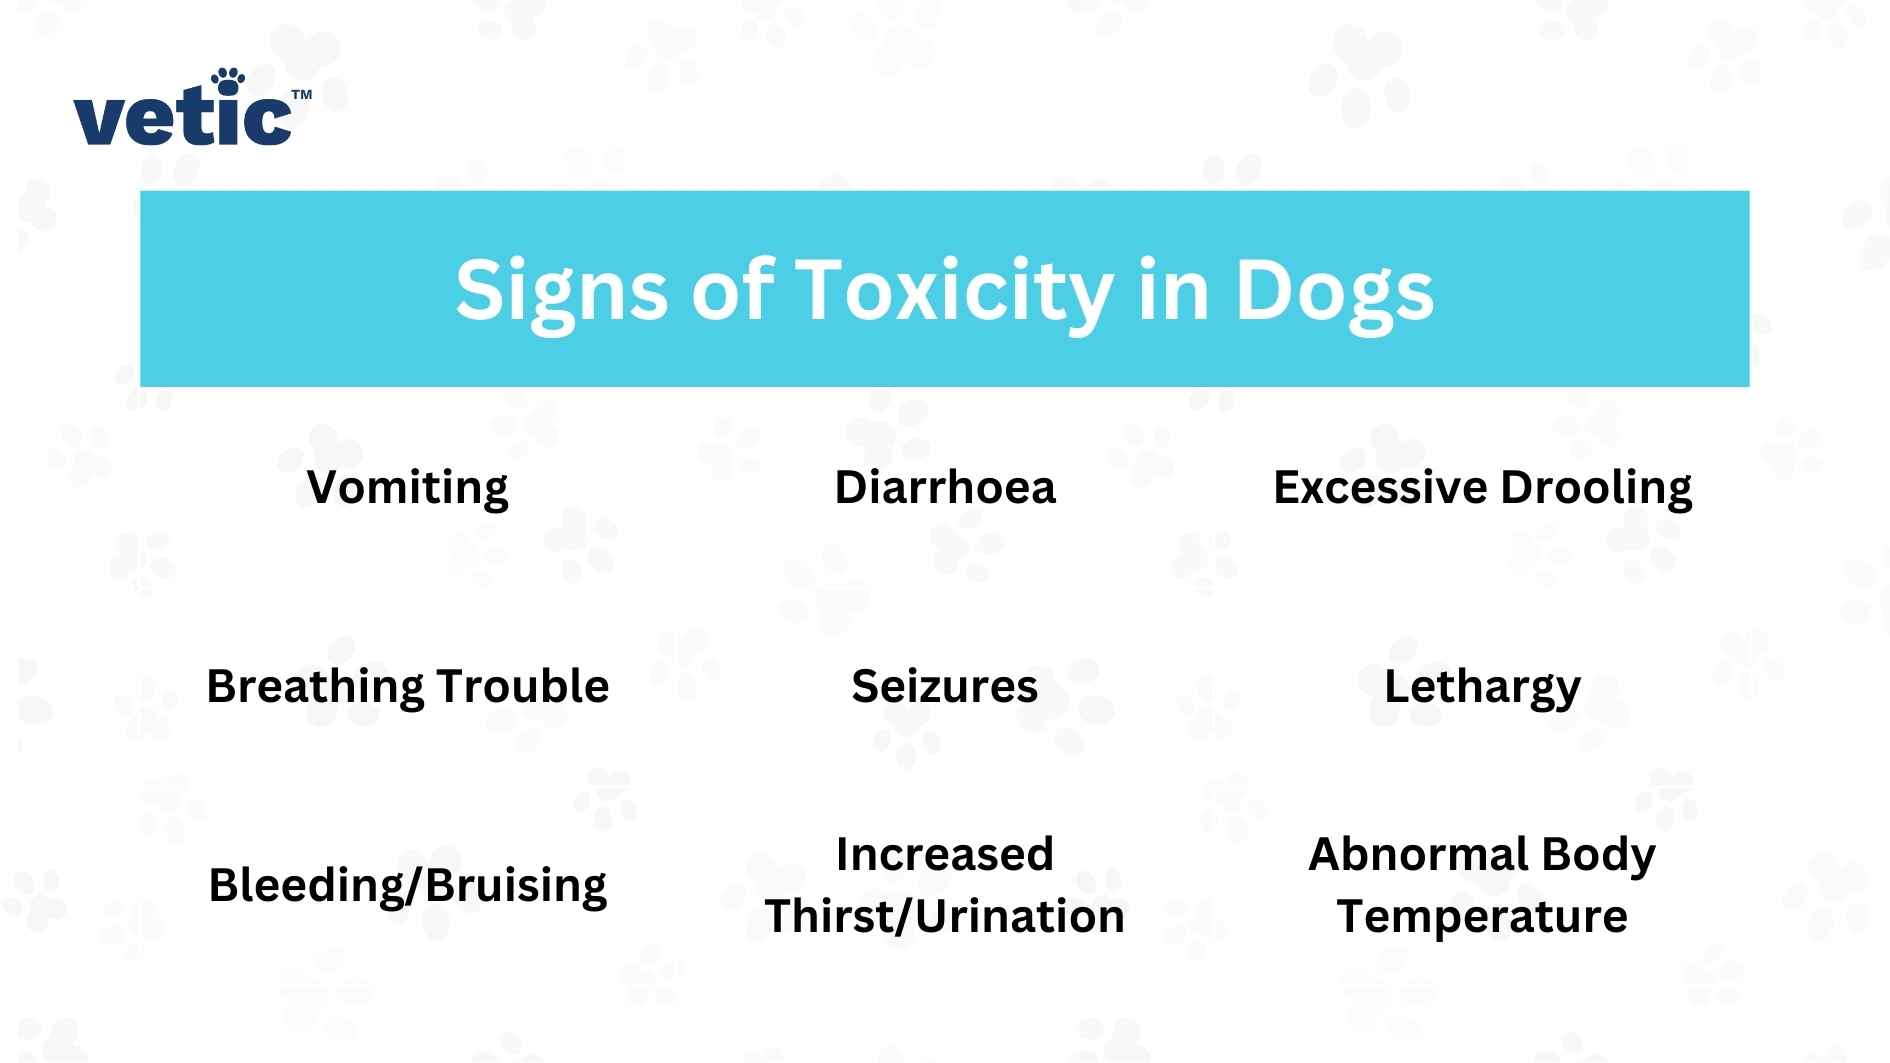 Signs of toxicity in dogs Vomiting, diarrhoea, excessive drooling or frothing at the mouth, increased thirst/urination, breathing trouble, seizures, lethargy, bleeding/bruising, abnormal temperature 